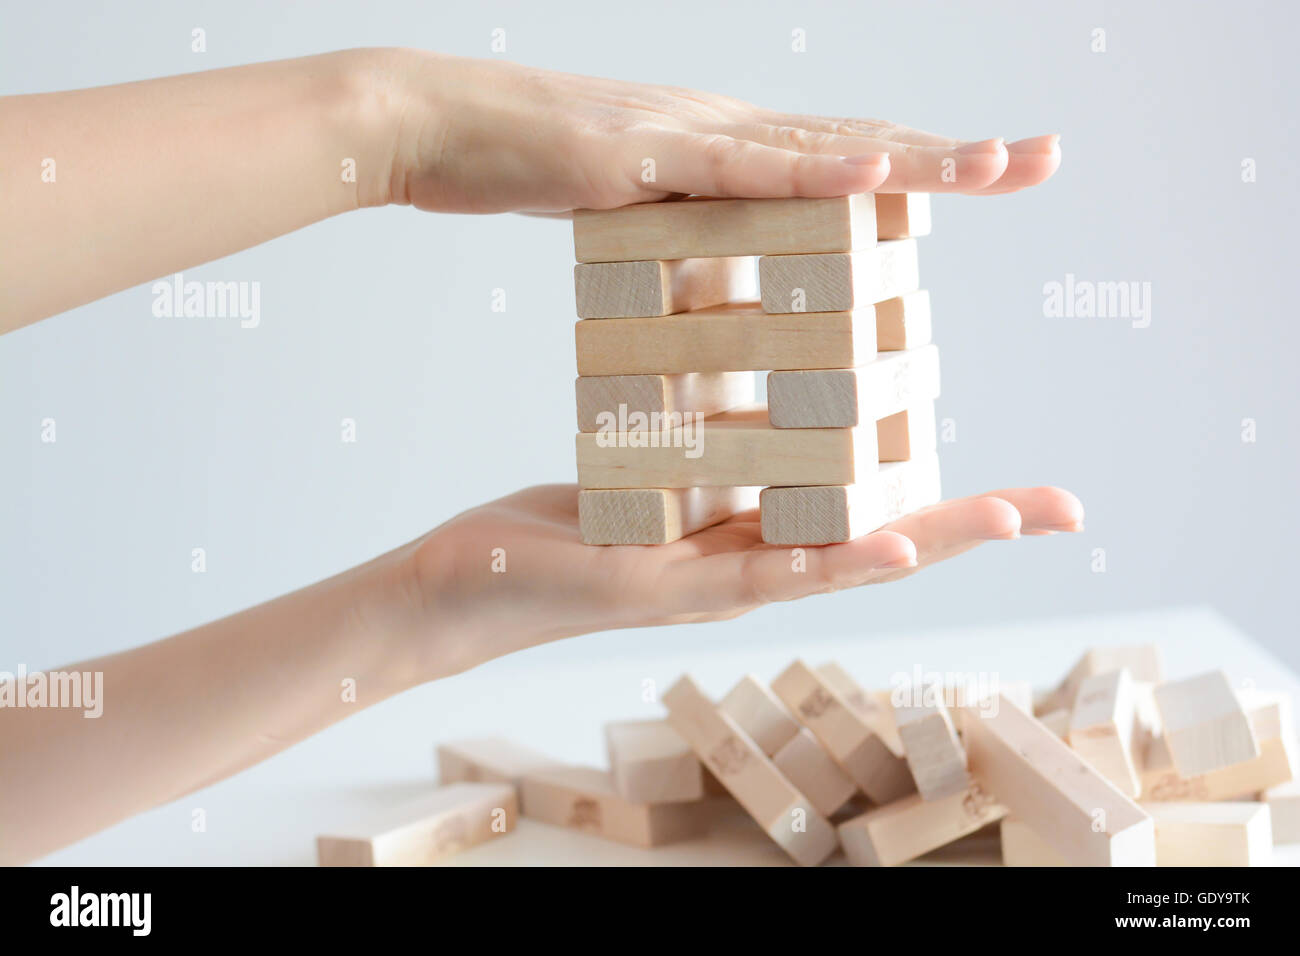 Security or insurance concept with hands protecting construction made from wooden blocks Stock Photo